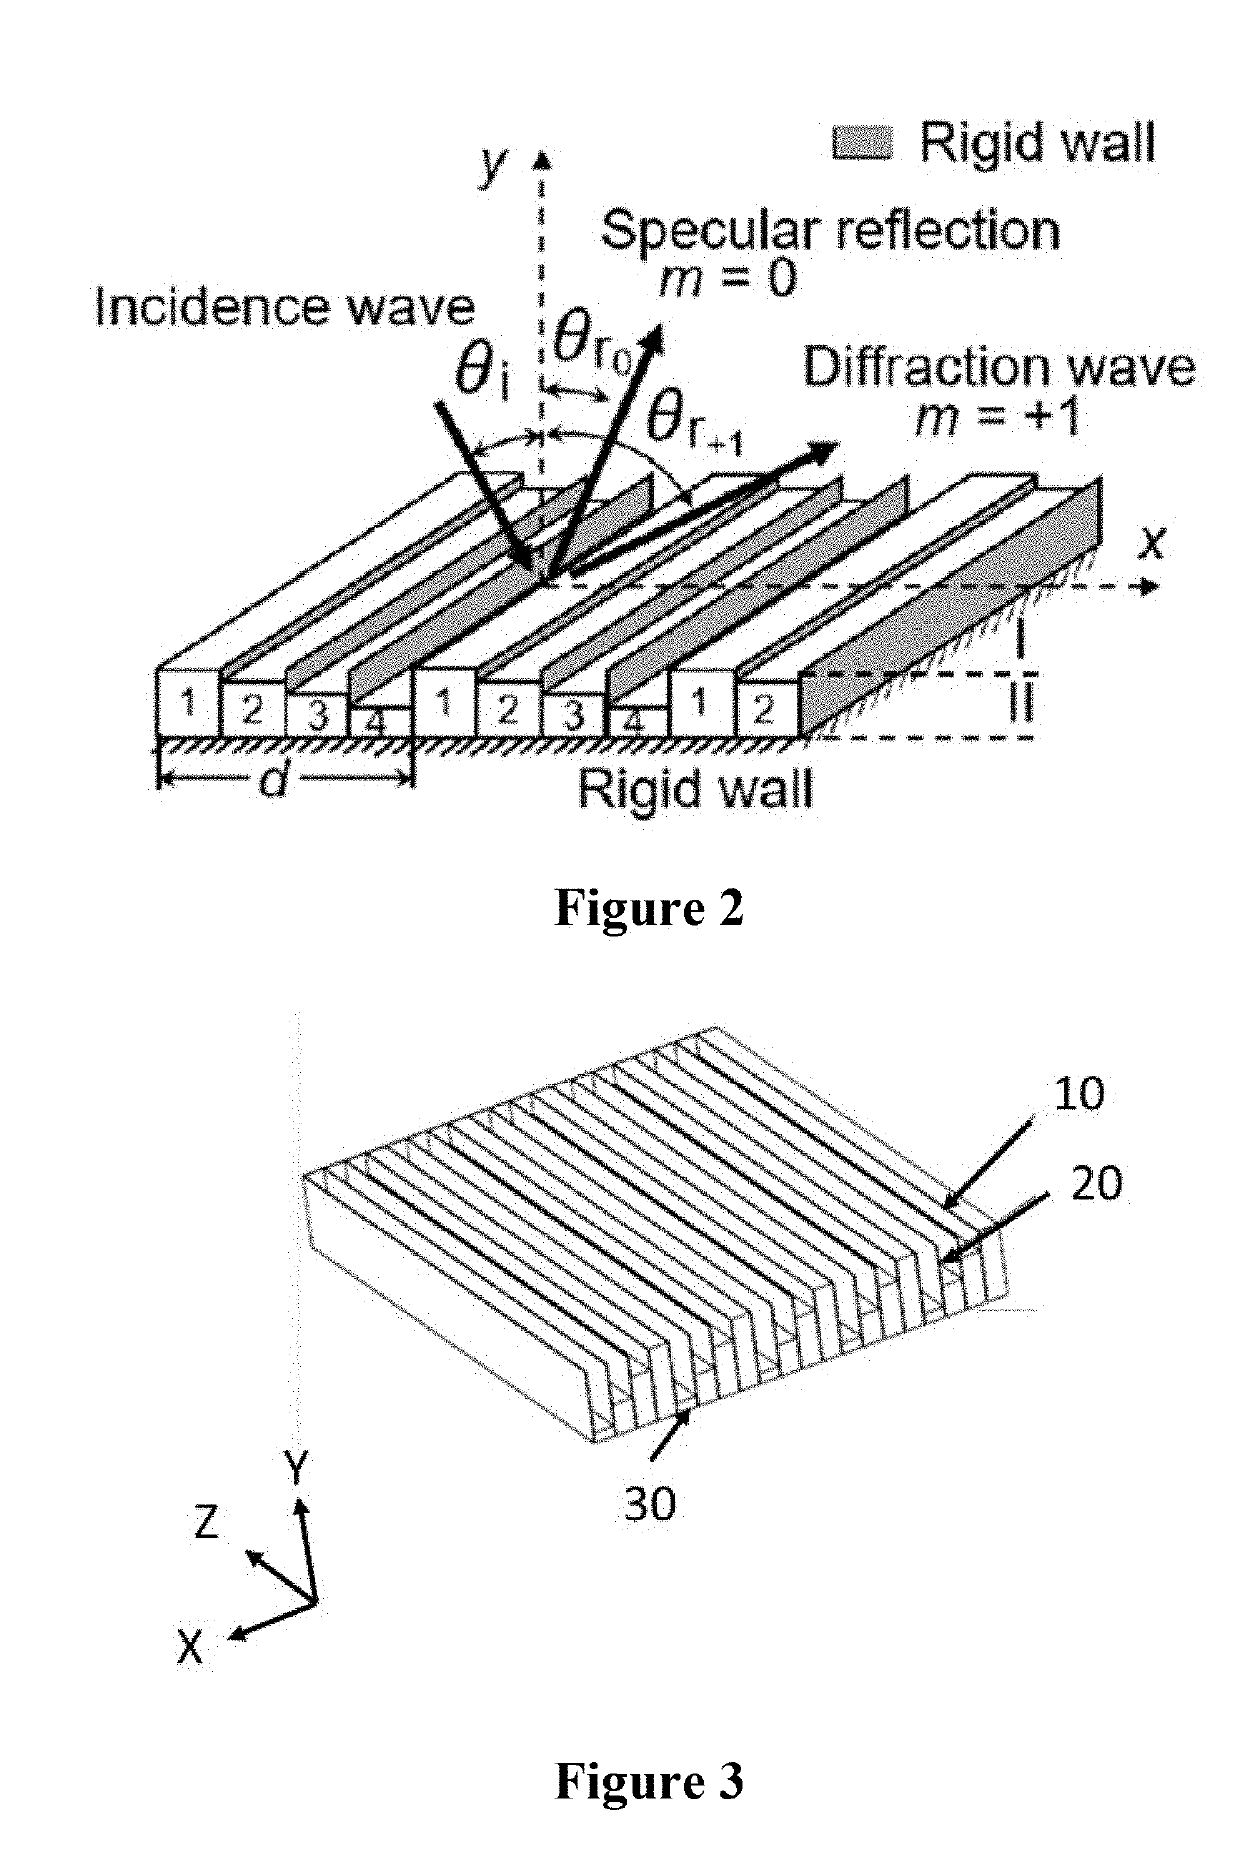 Sound absorber with stair-stepping structure